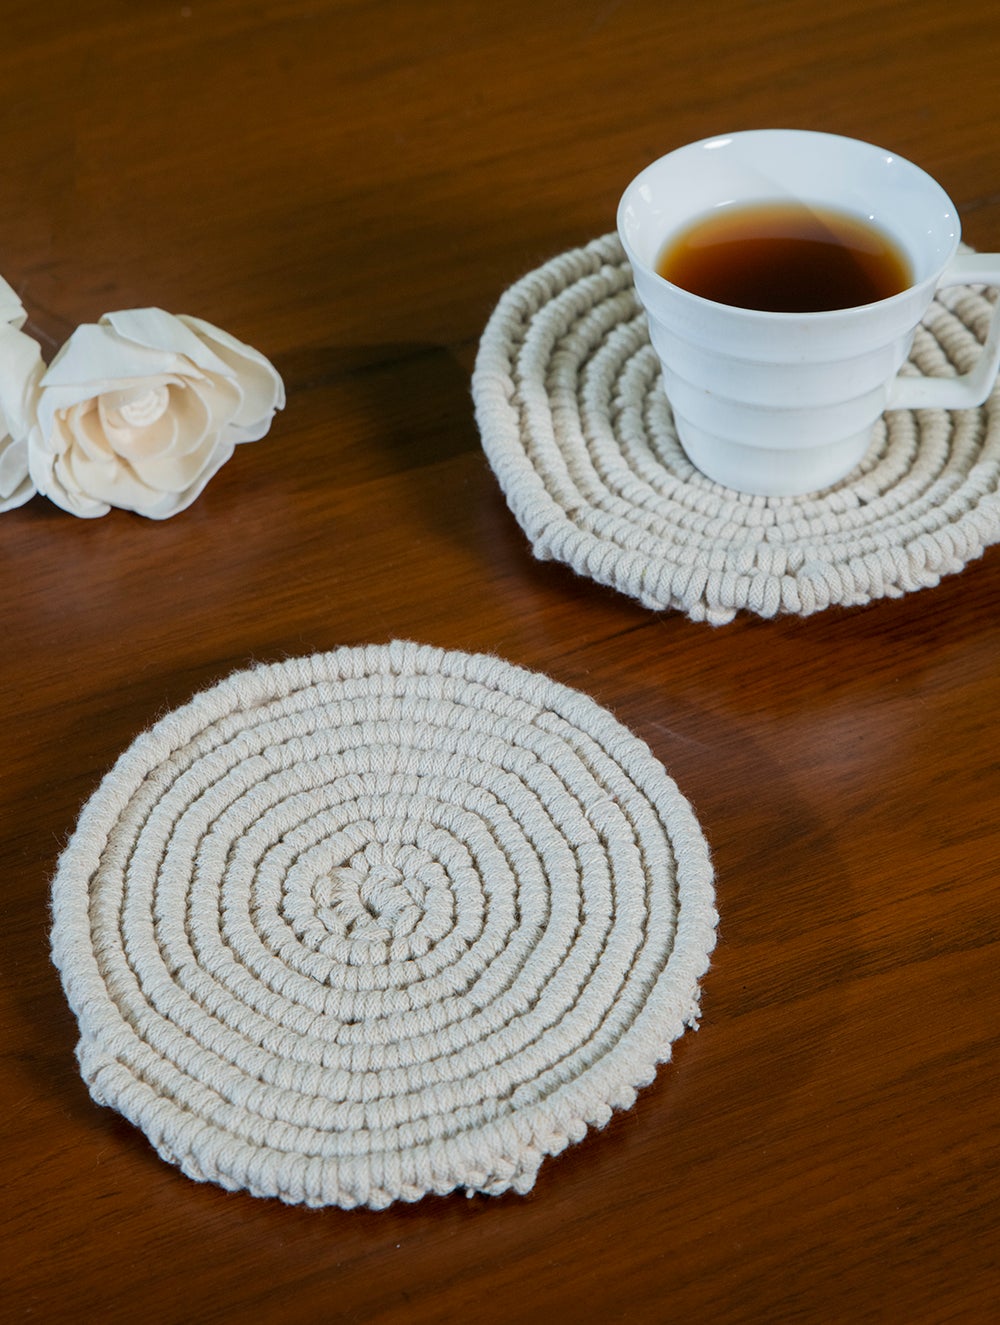 Load image into Gallery viewer, Handknotted Macramé Coaster Sets (Set of 2) - Off- White